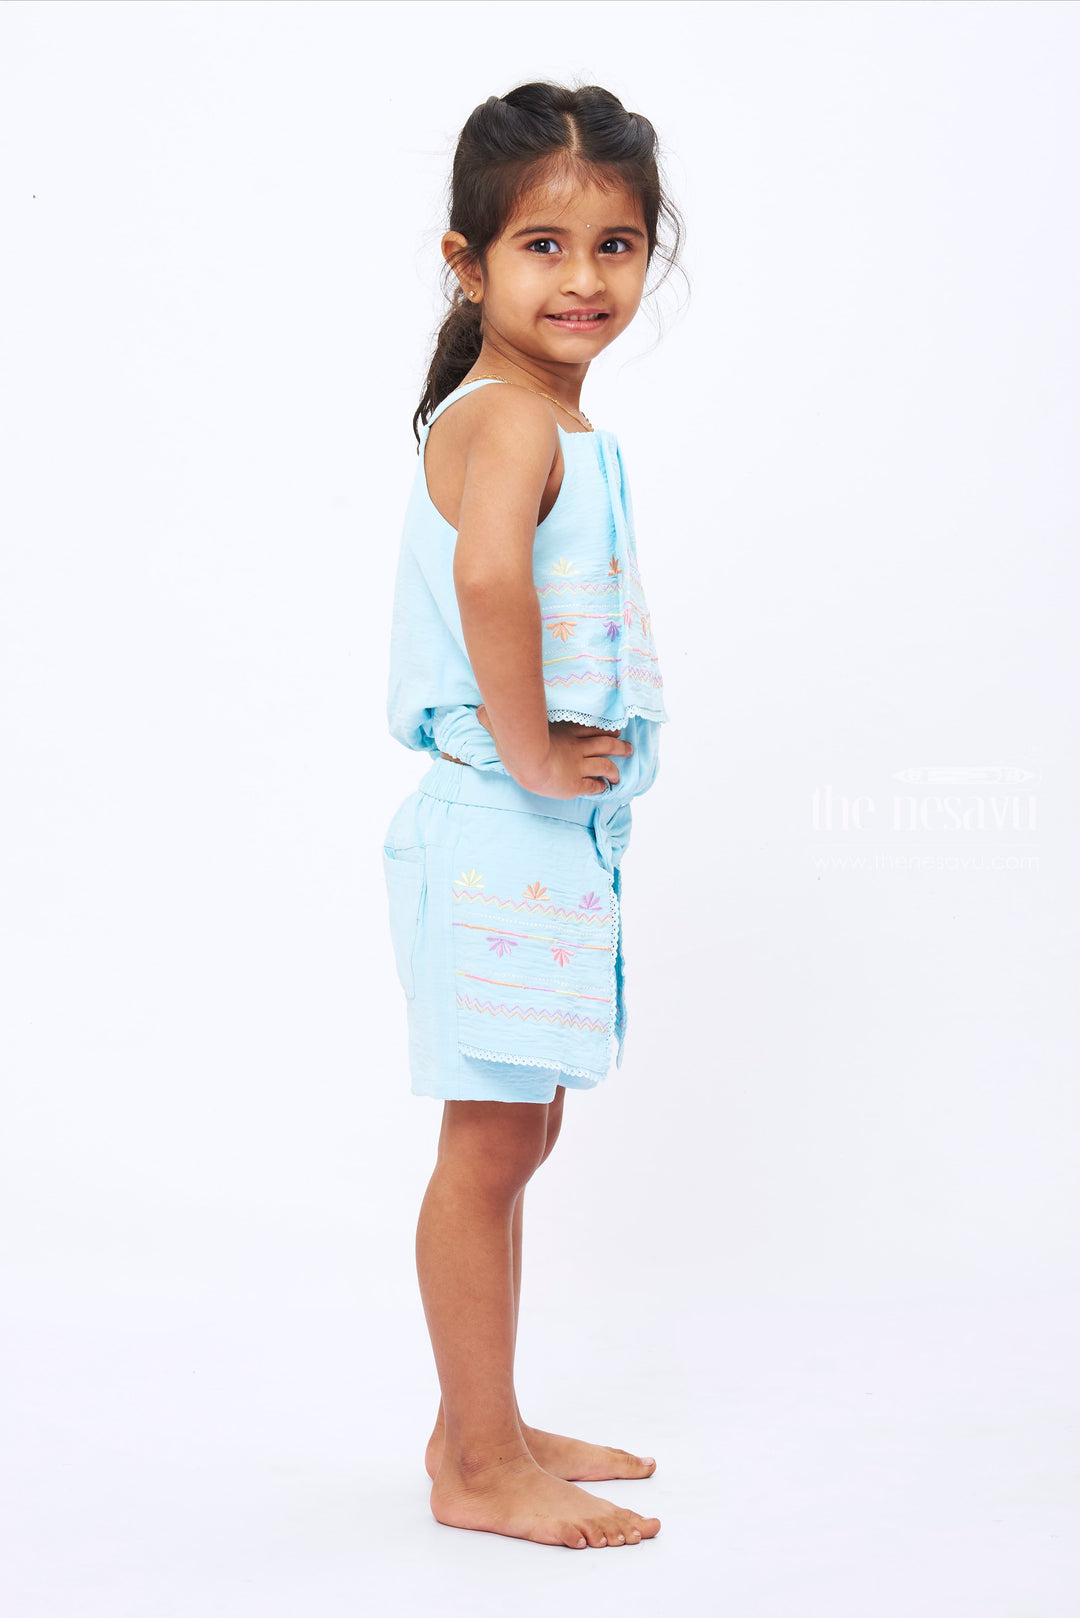 The Nesavu Baby Casual Sets Girls Breezy Floral Top and Shorts Set - Summer Delight in Soft Blue Nesavu Embroidered Floral Top and Shorts Set for Girls | Soft Blue Summer Wear | The Nesavu